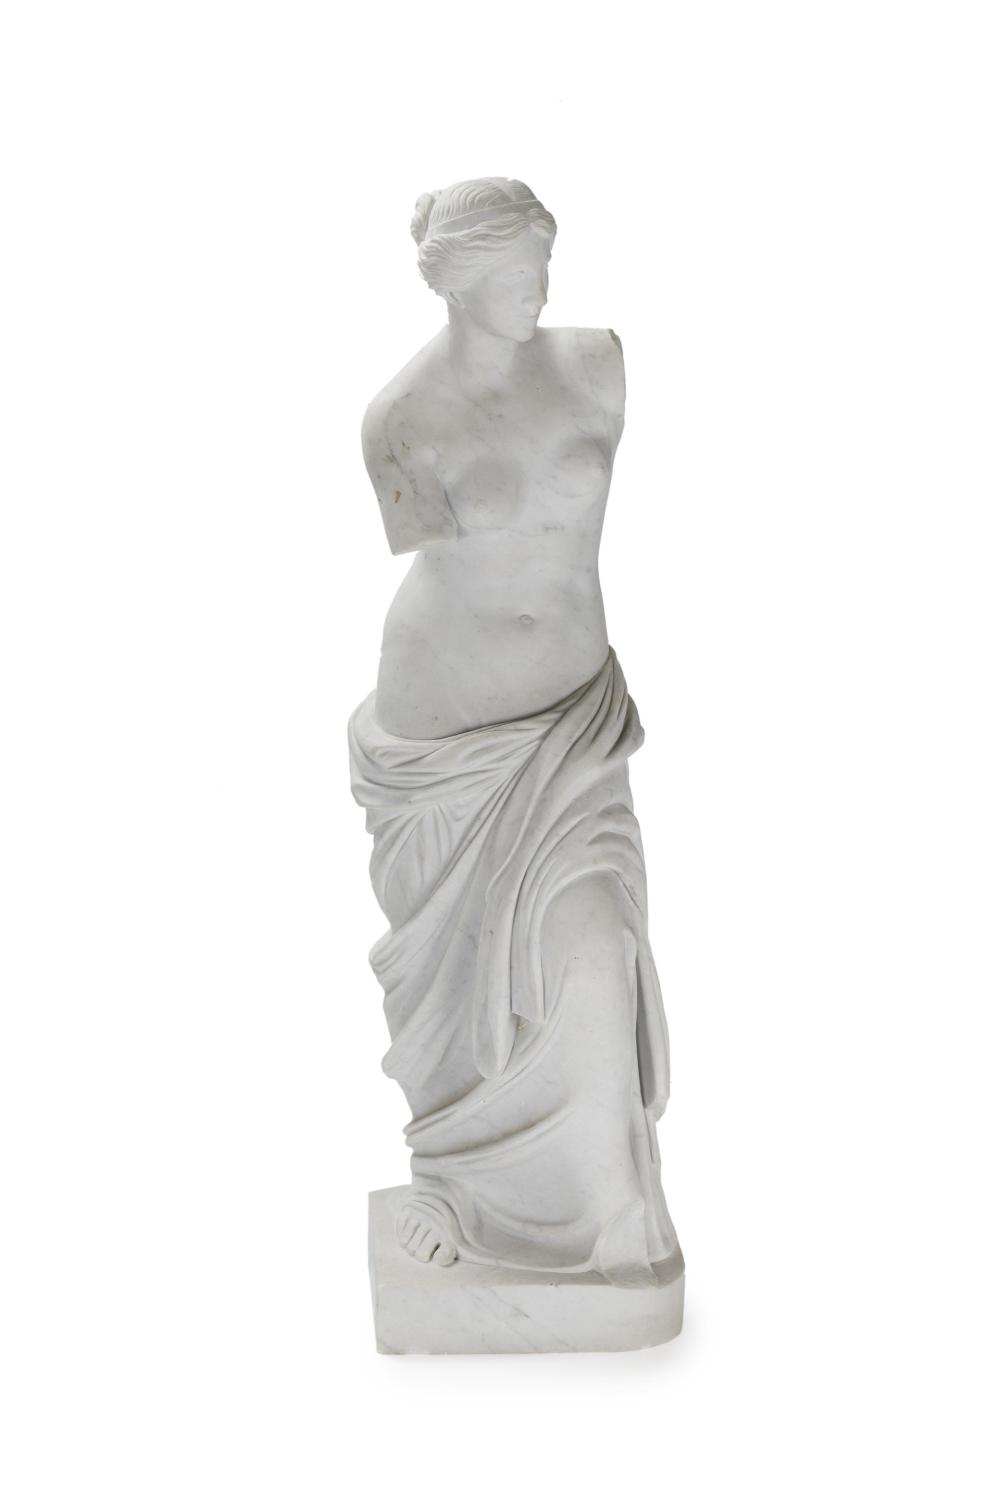 A MARBLE SCULPTURE OF THE VENUS